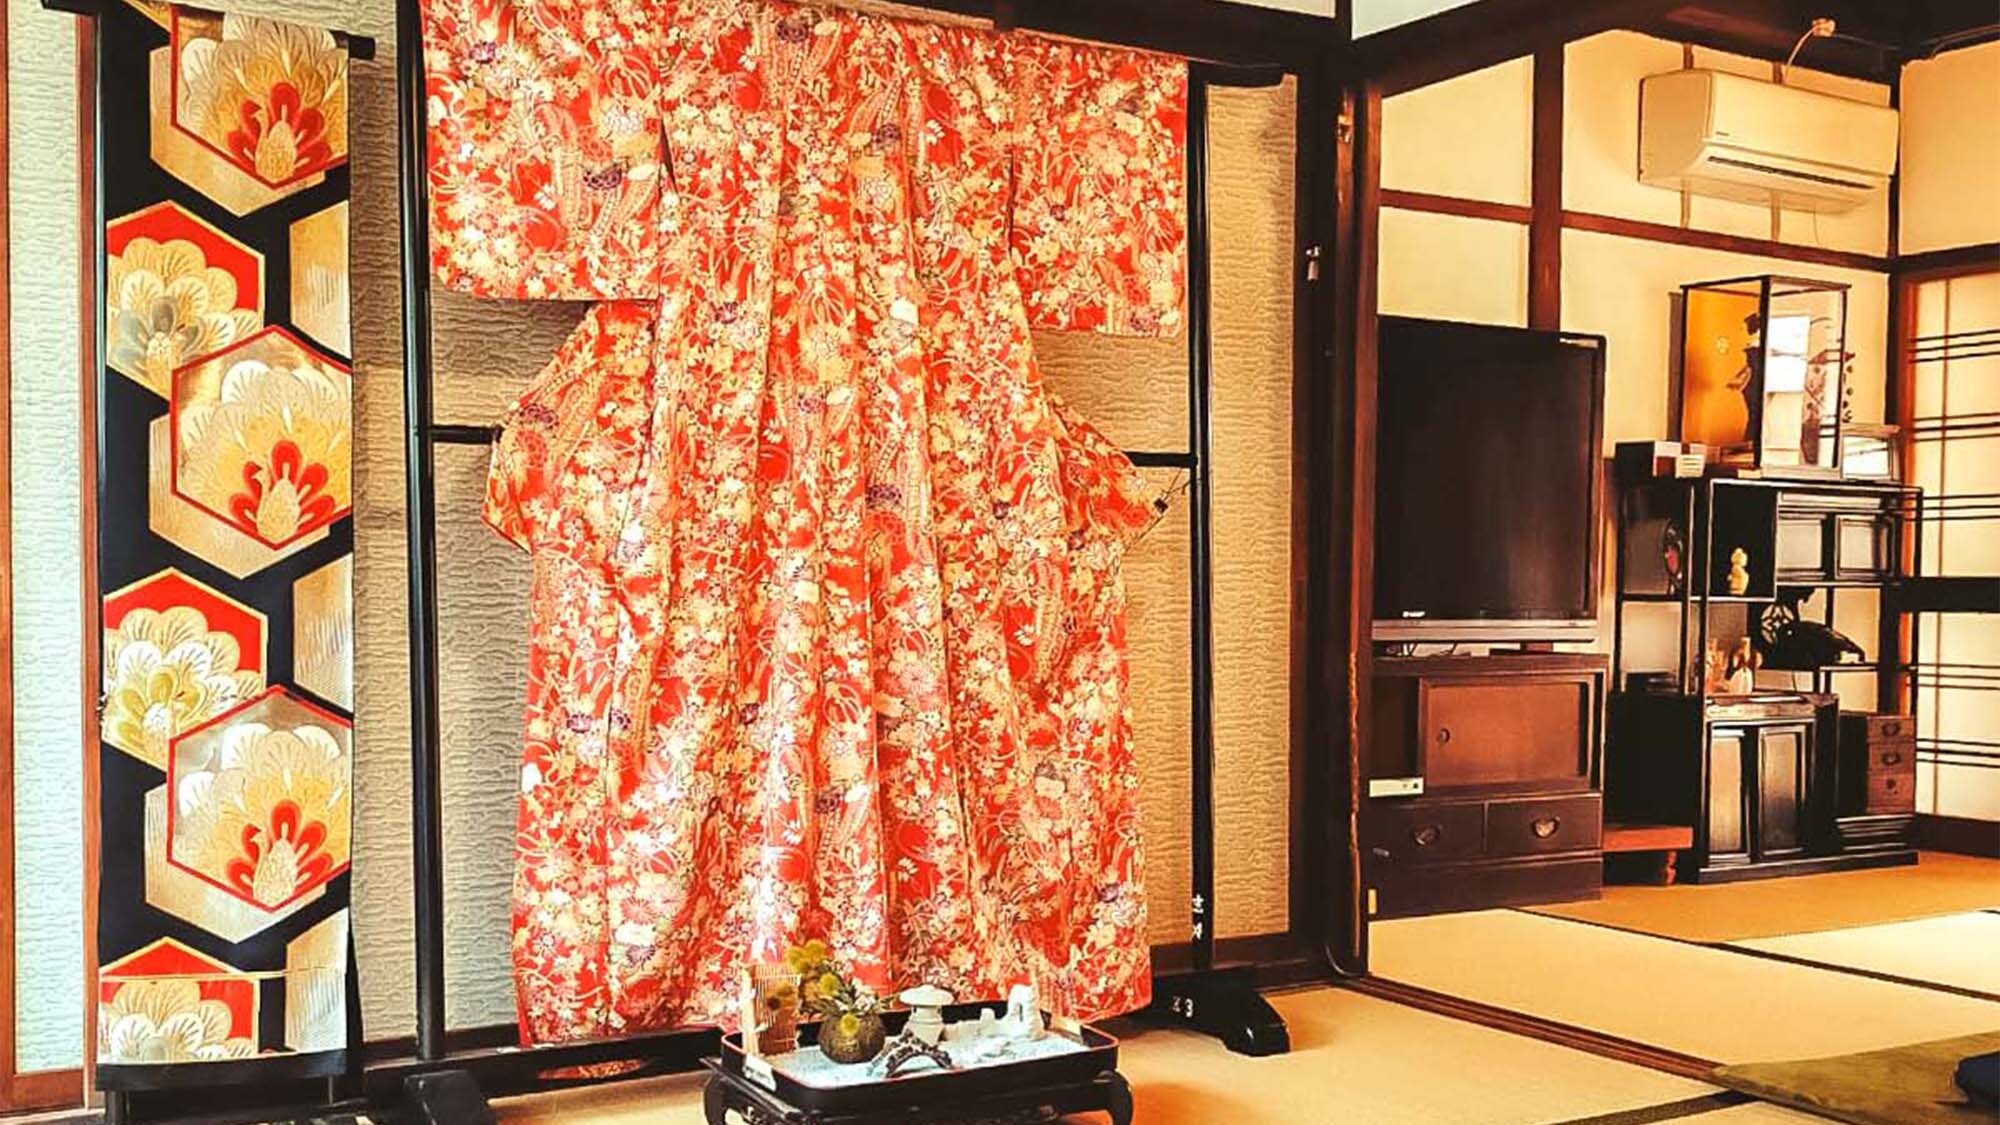 ・ Kimono and obi are on display. Please have a look nearby